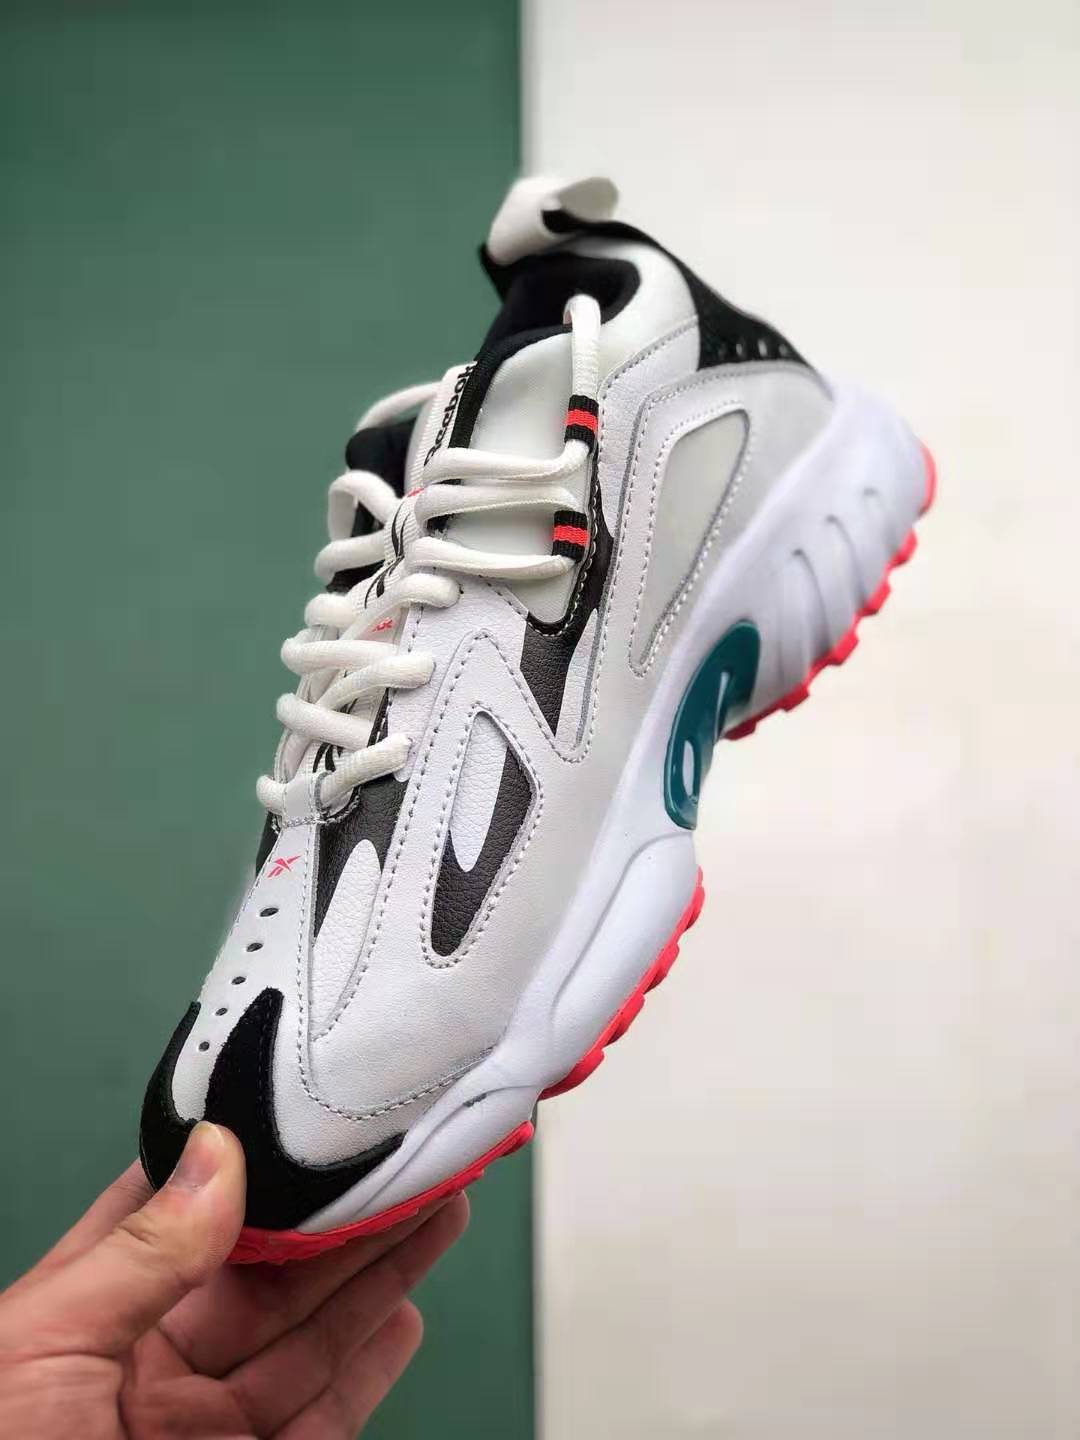 Reebok DMX Series 1200 'Neon Red' CN7590 - Stylish and Comfortable Sneakers